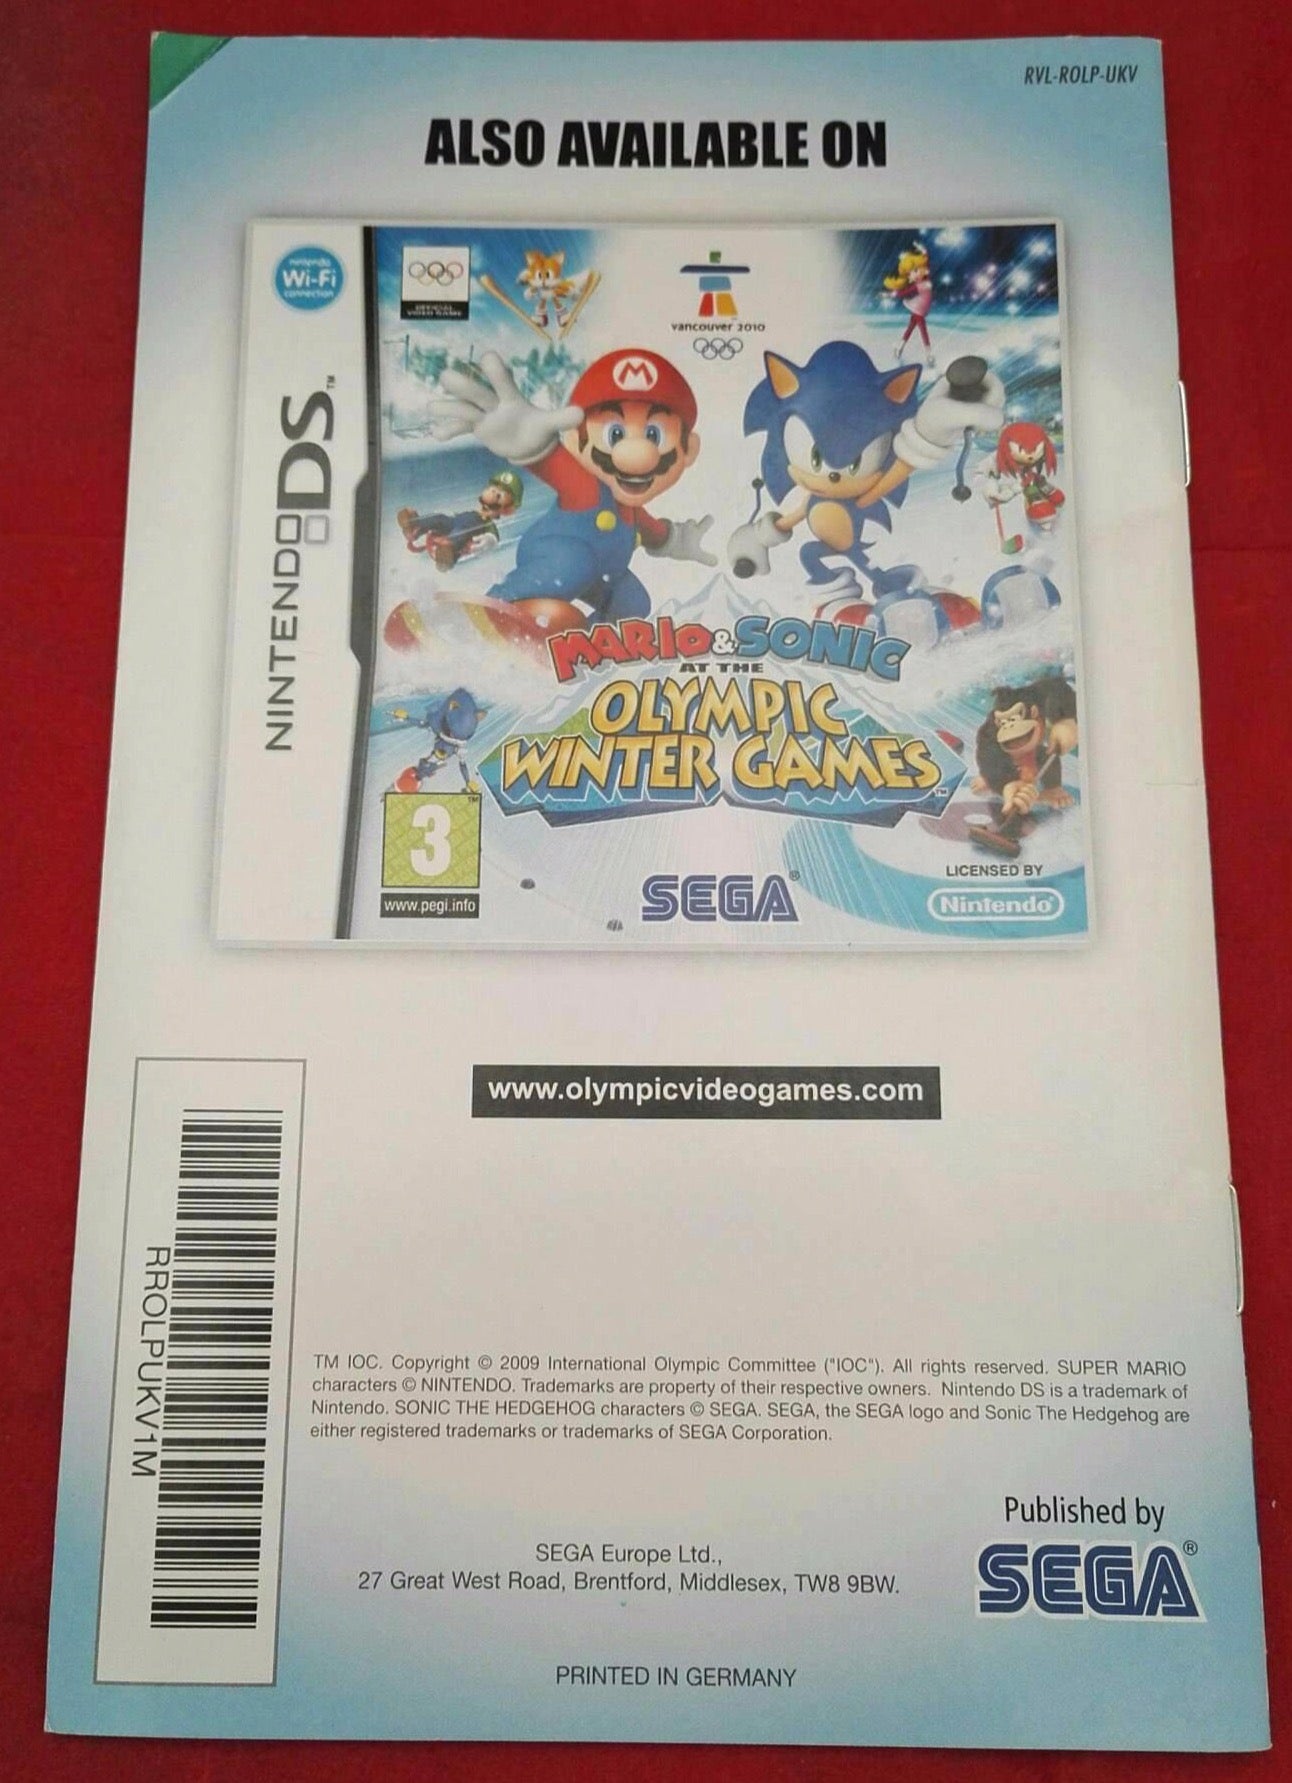 Mario & Sonic at the Winter Olympic Games Nintendo Wii Spare Manual Only